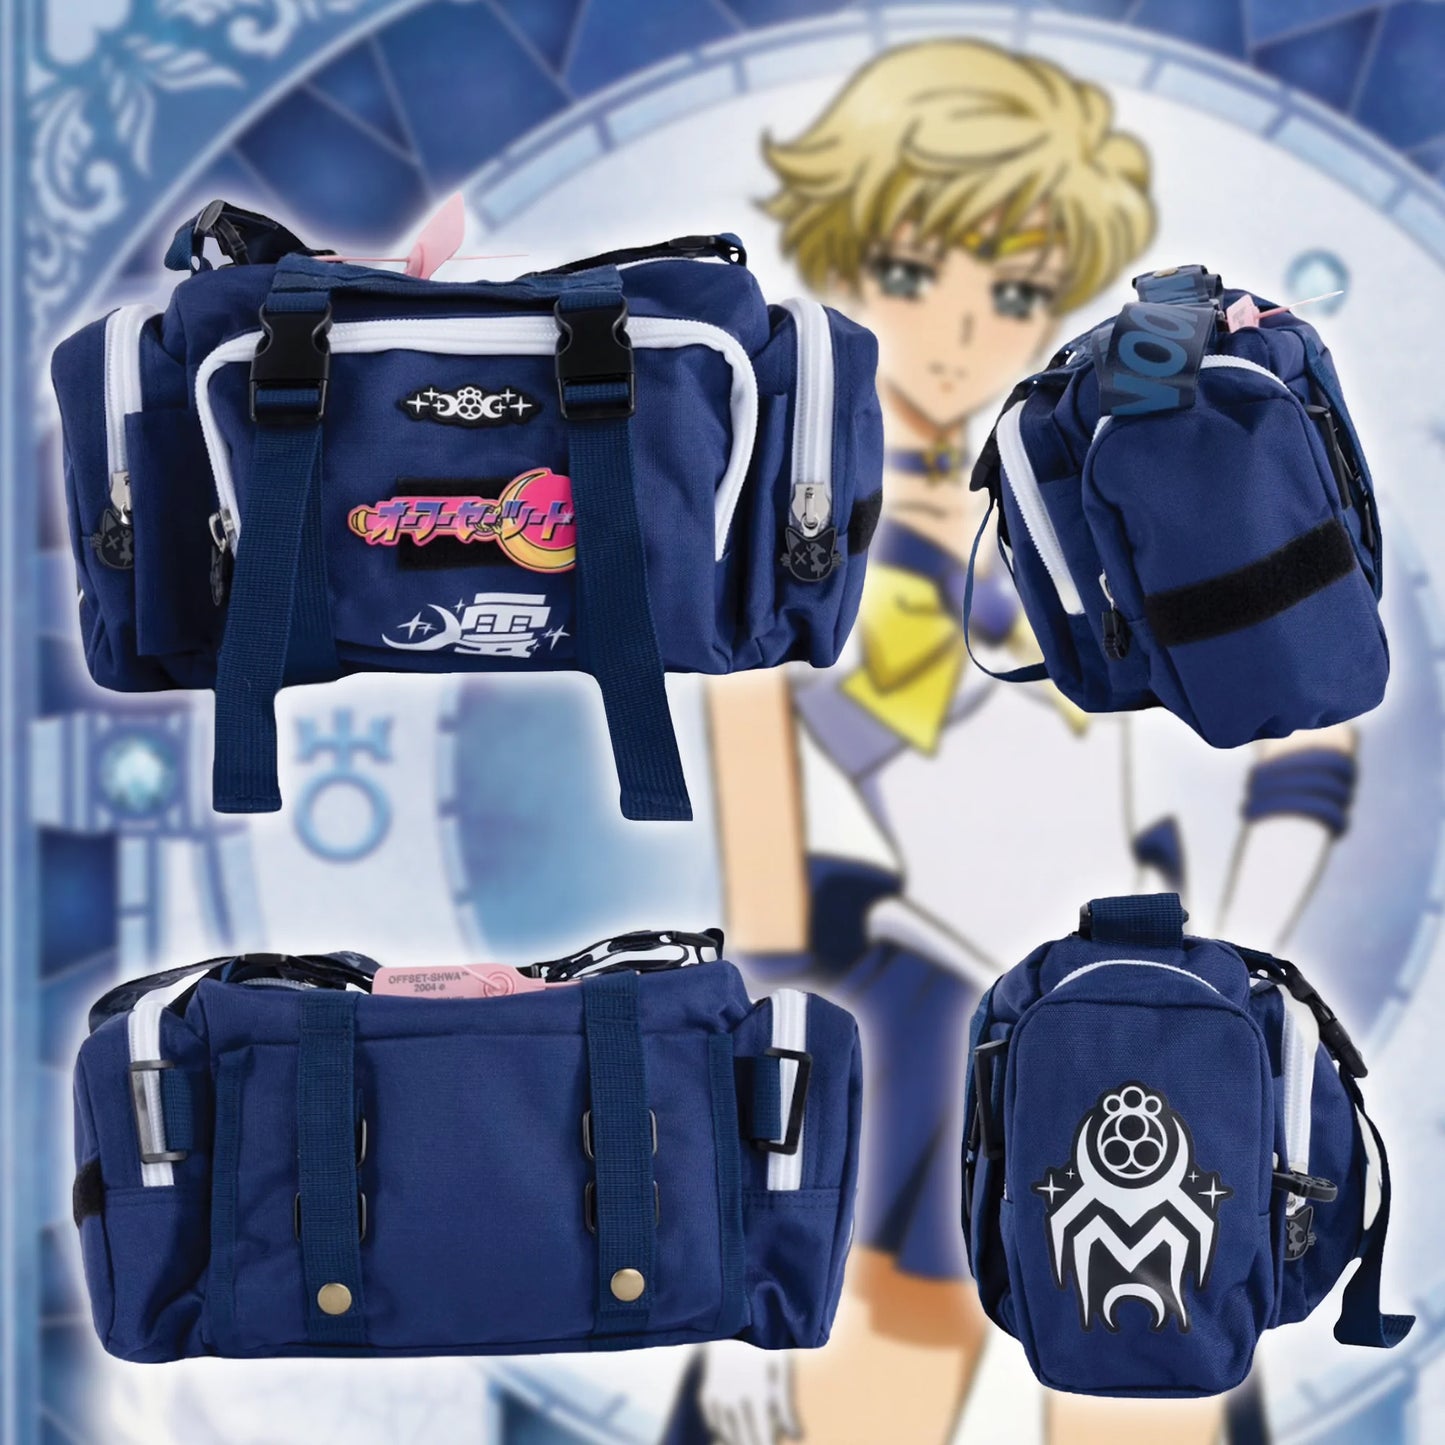 SHWA - Uranus Mini Duffle with Strap (Pre-Order) Patches Included